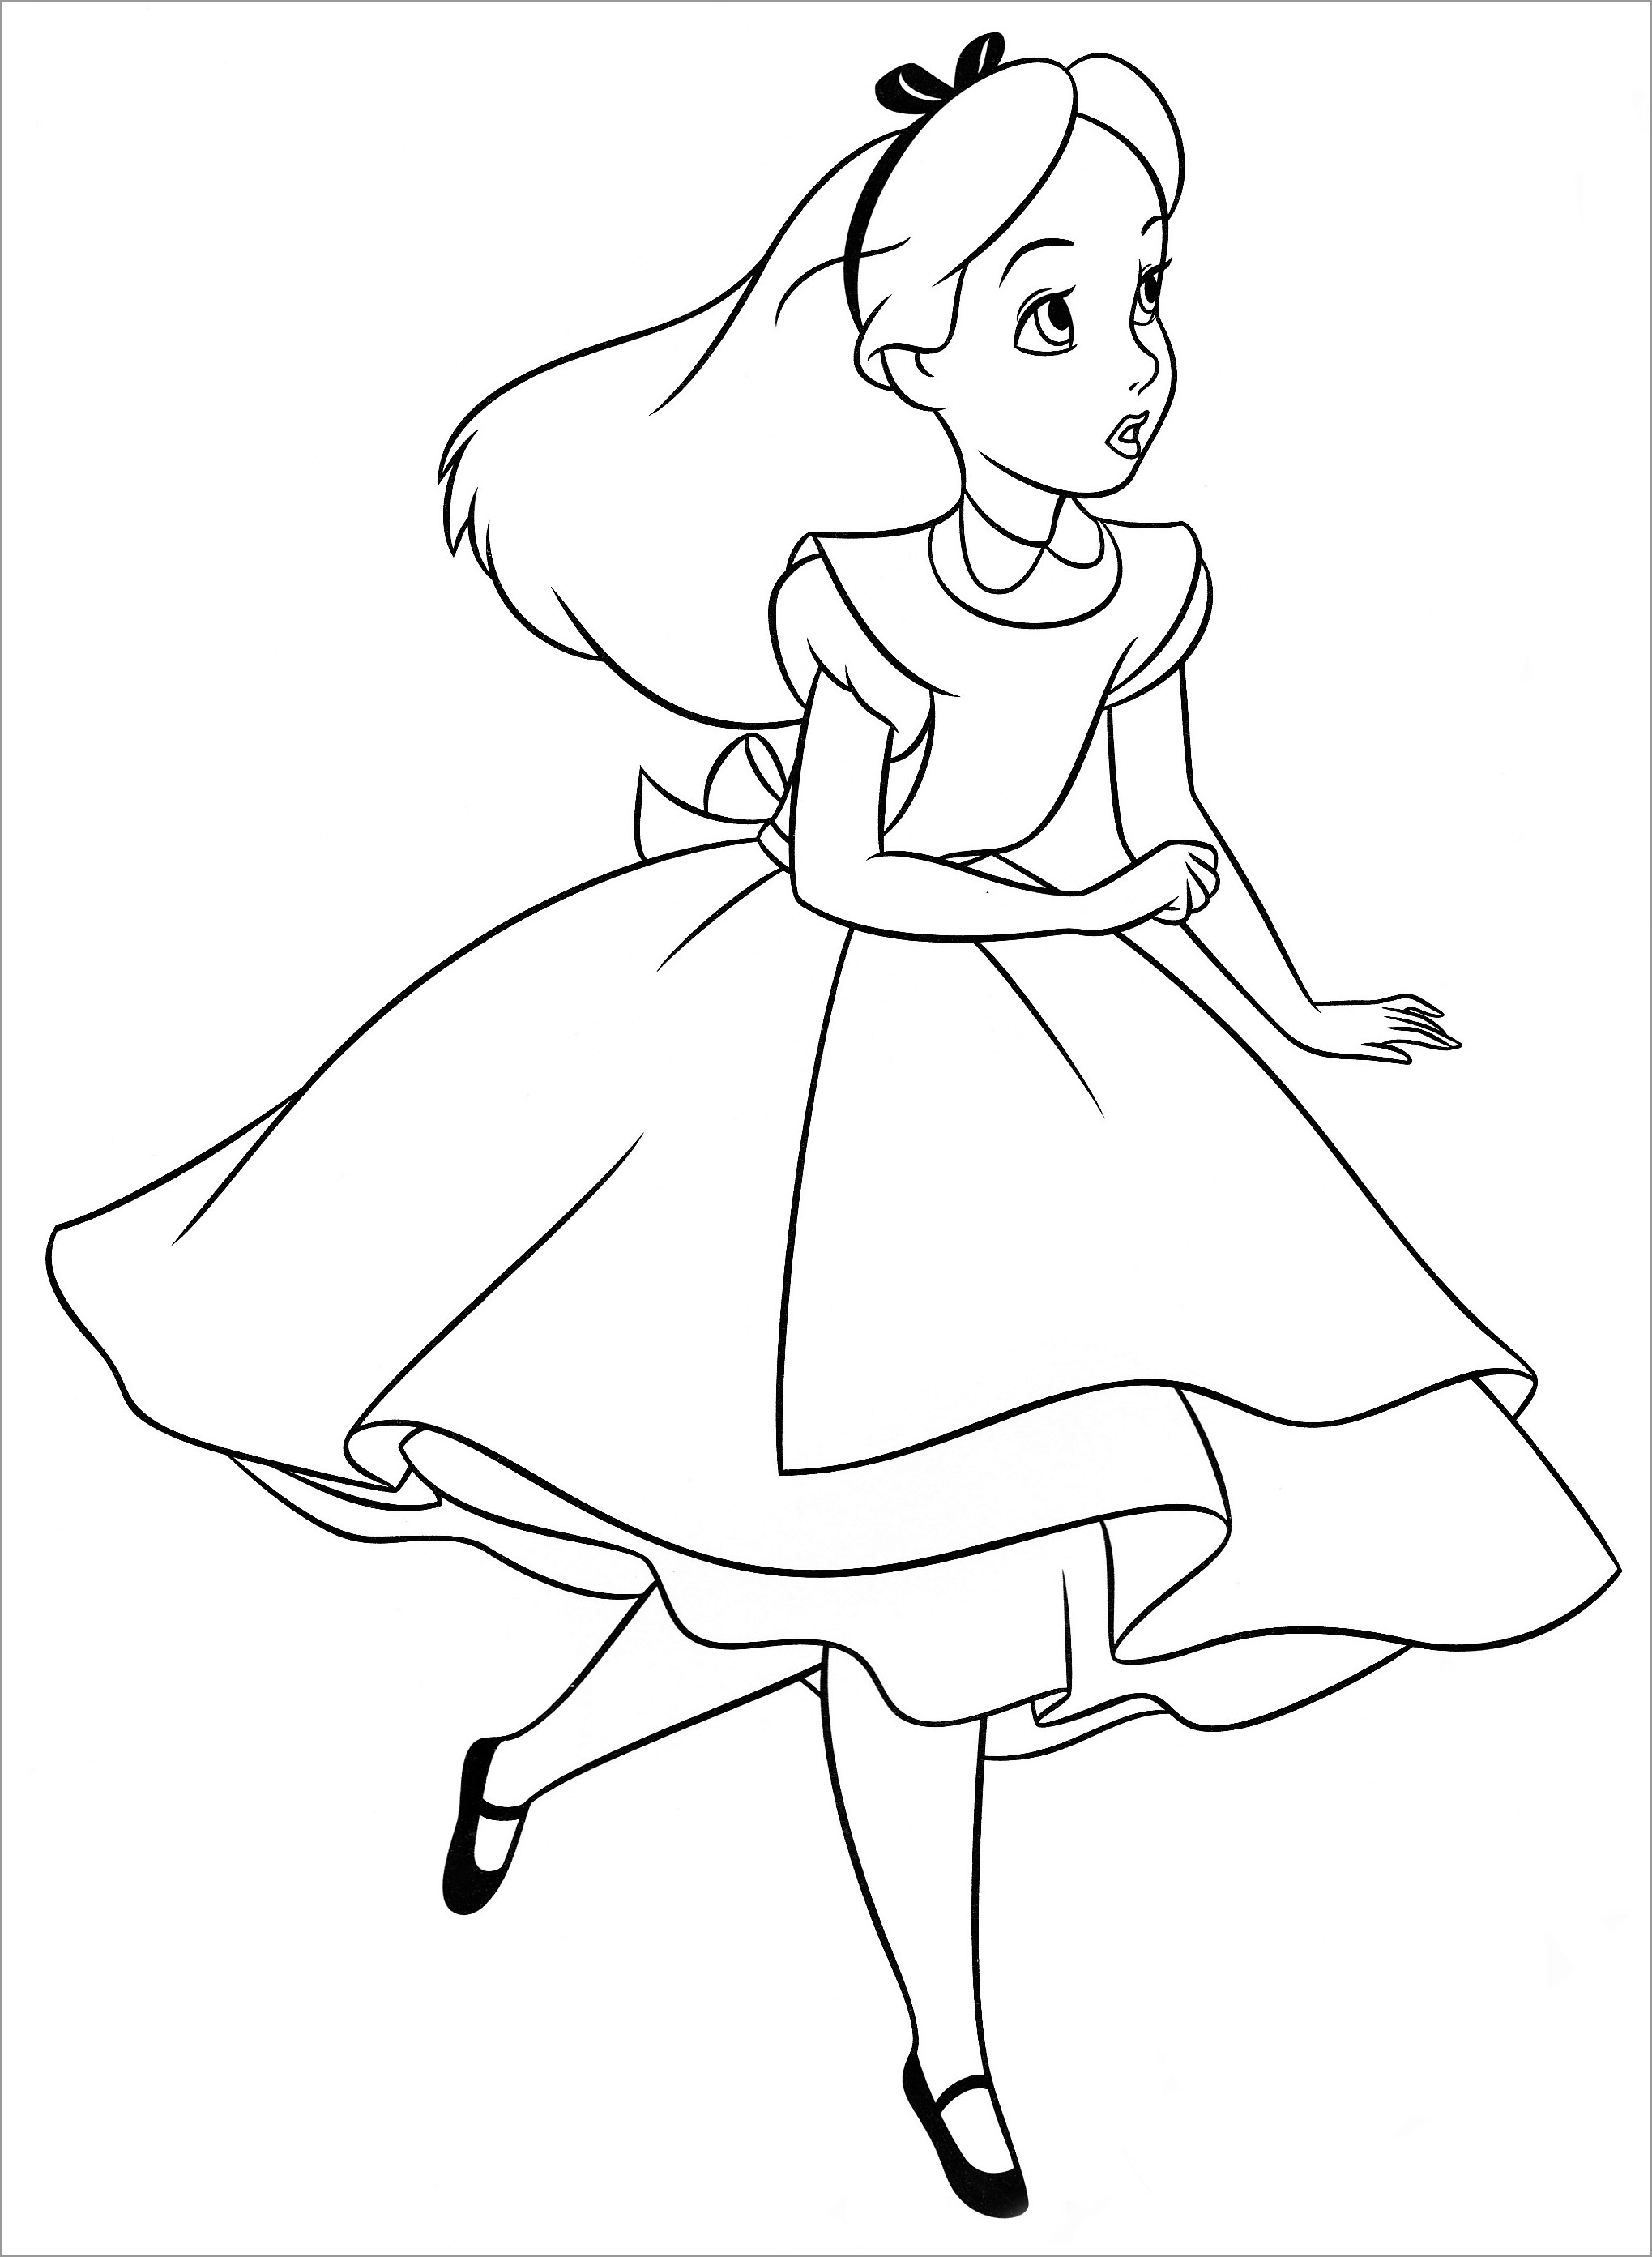 Alice In Wonderland Coloring Pages Alice In Wonderland Free Coloring